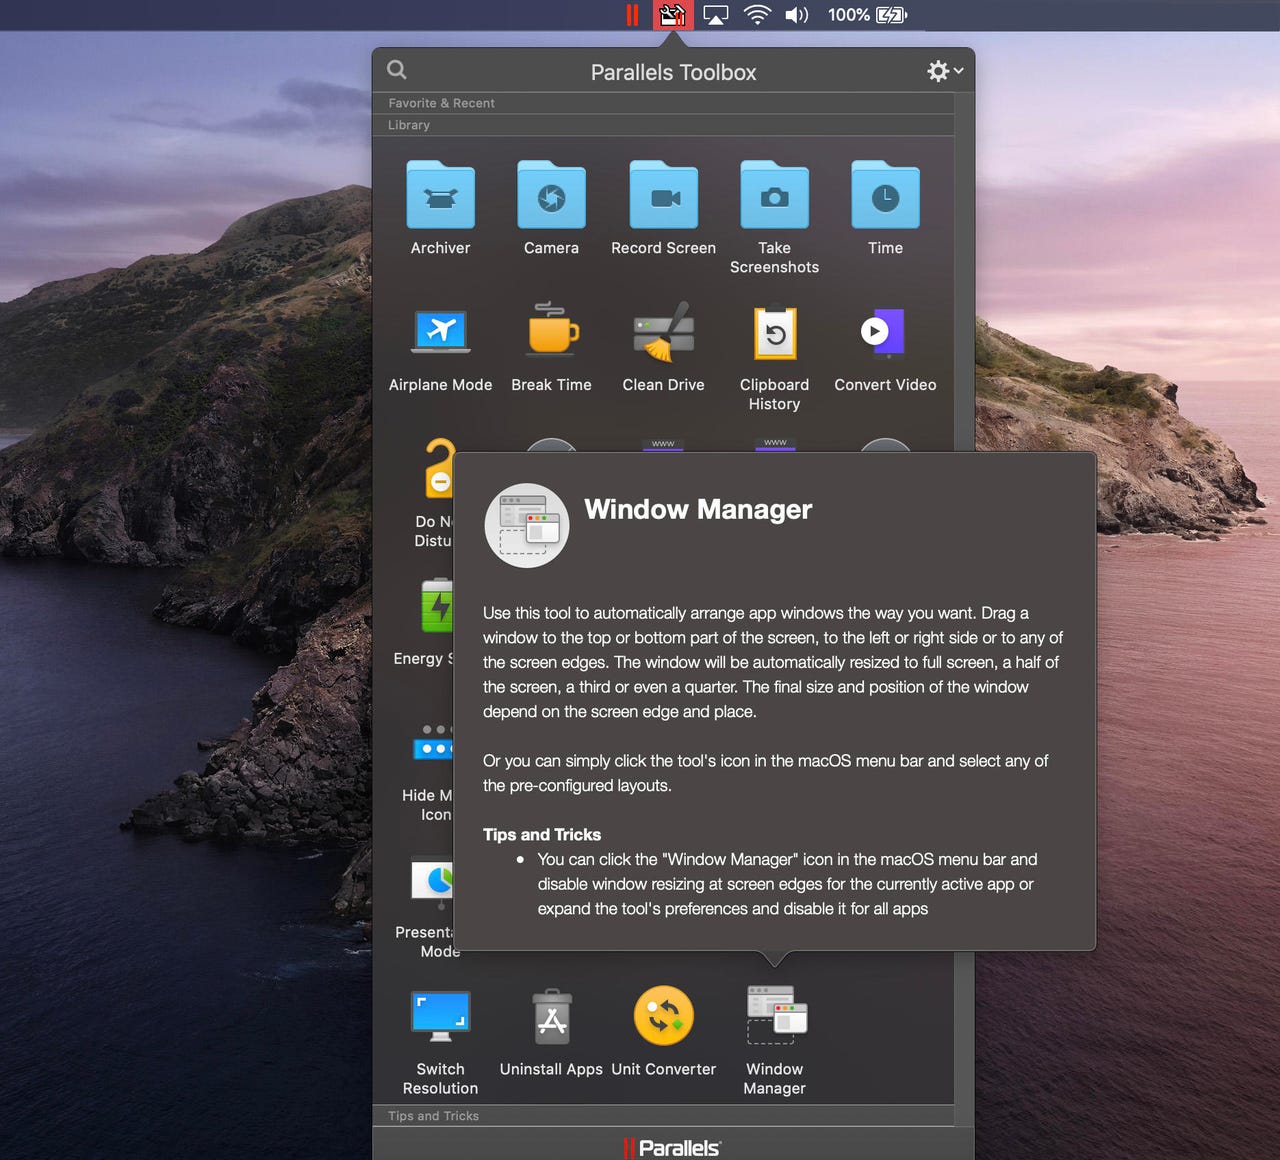 parallels-toolbox-window-manager-macos-screenshot